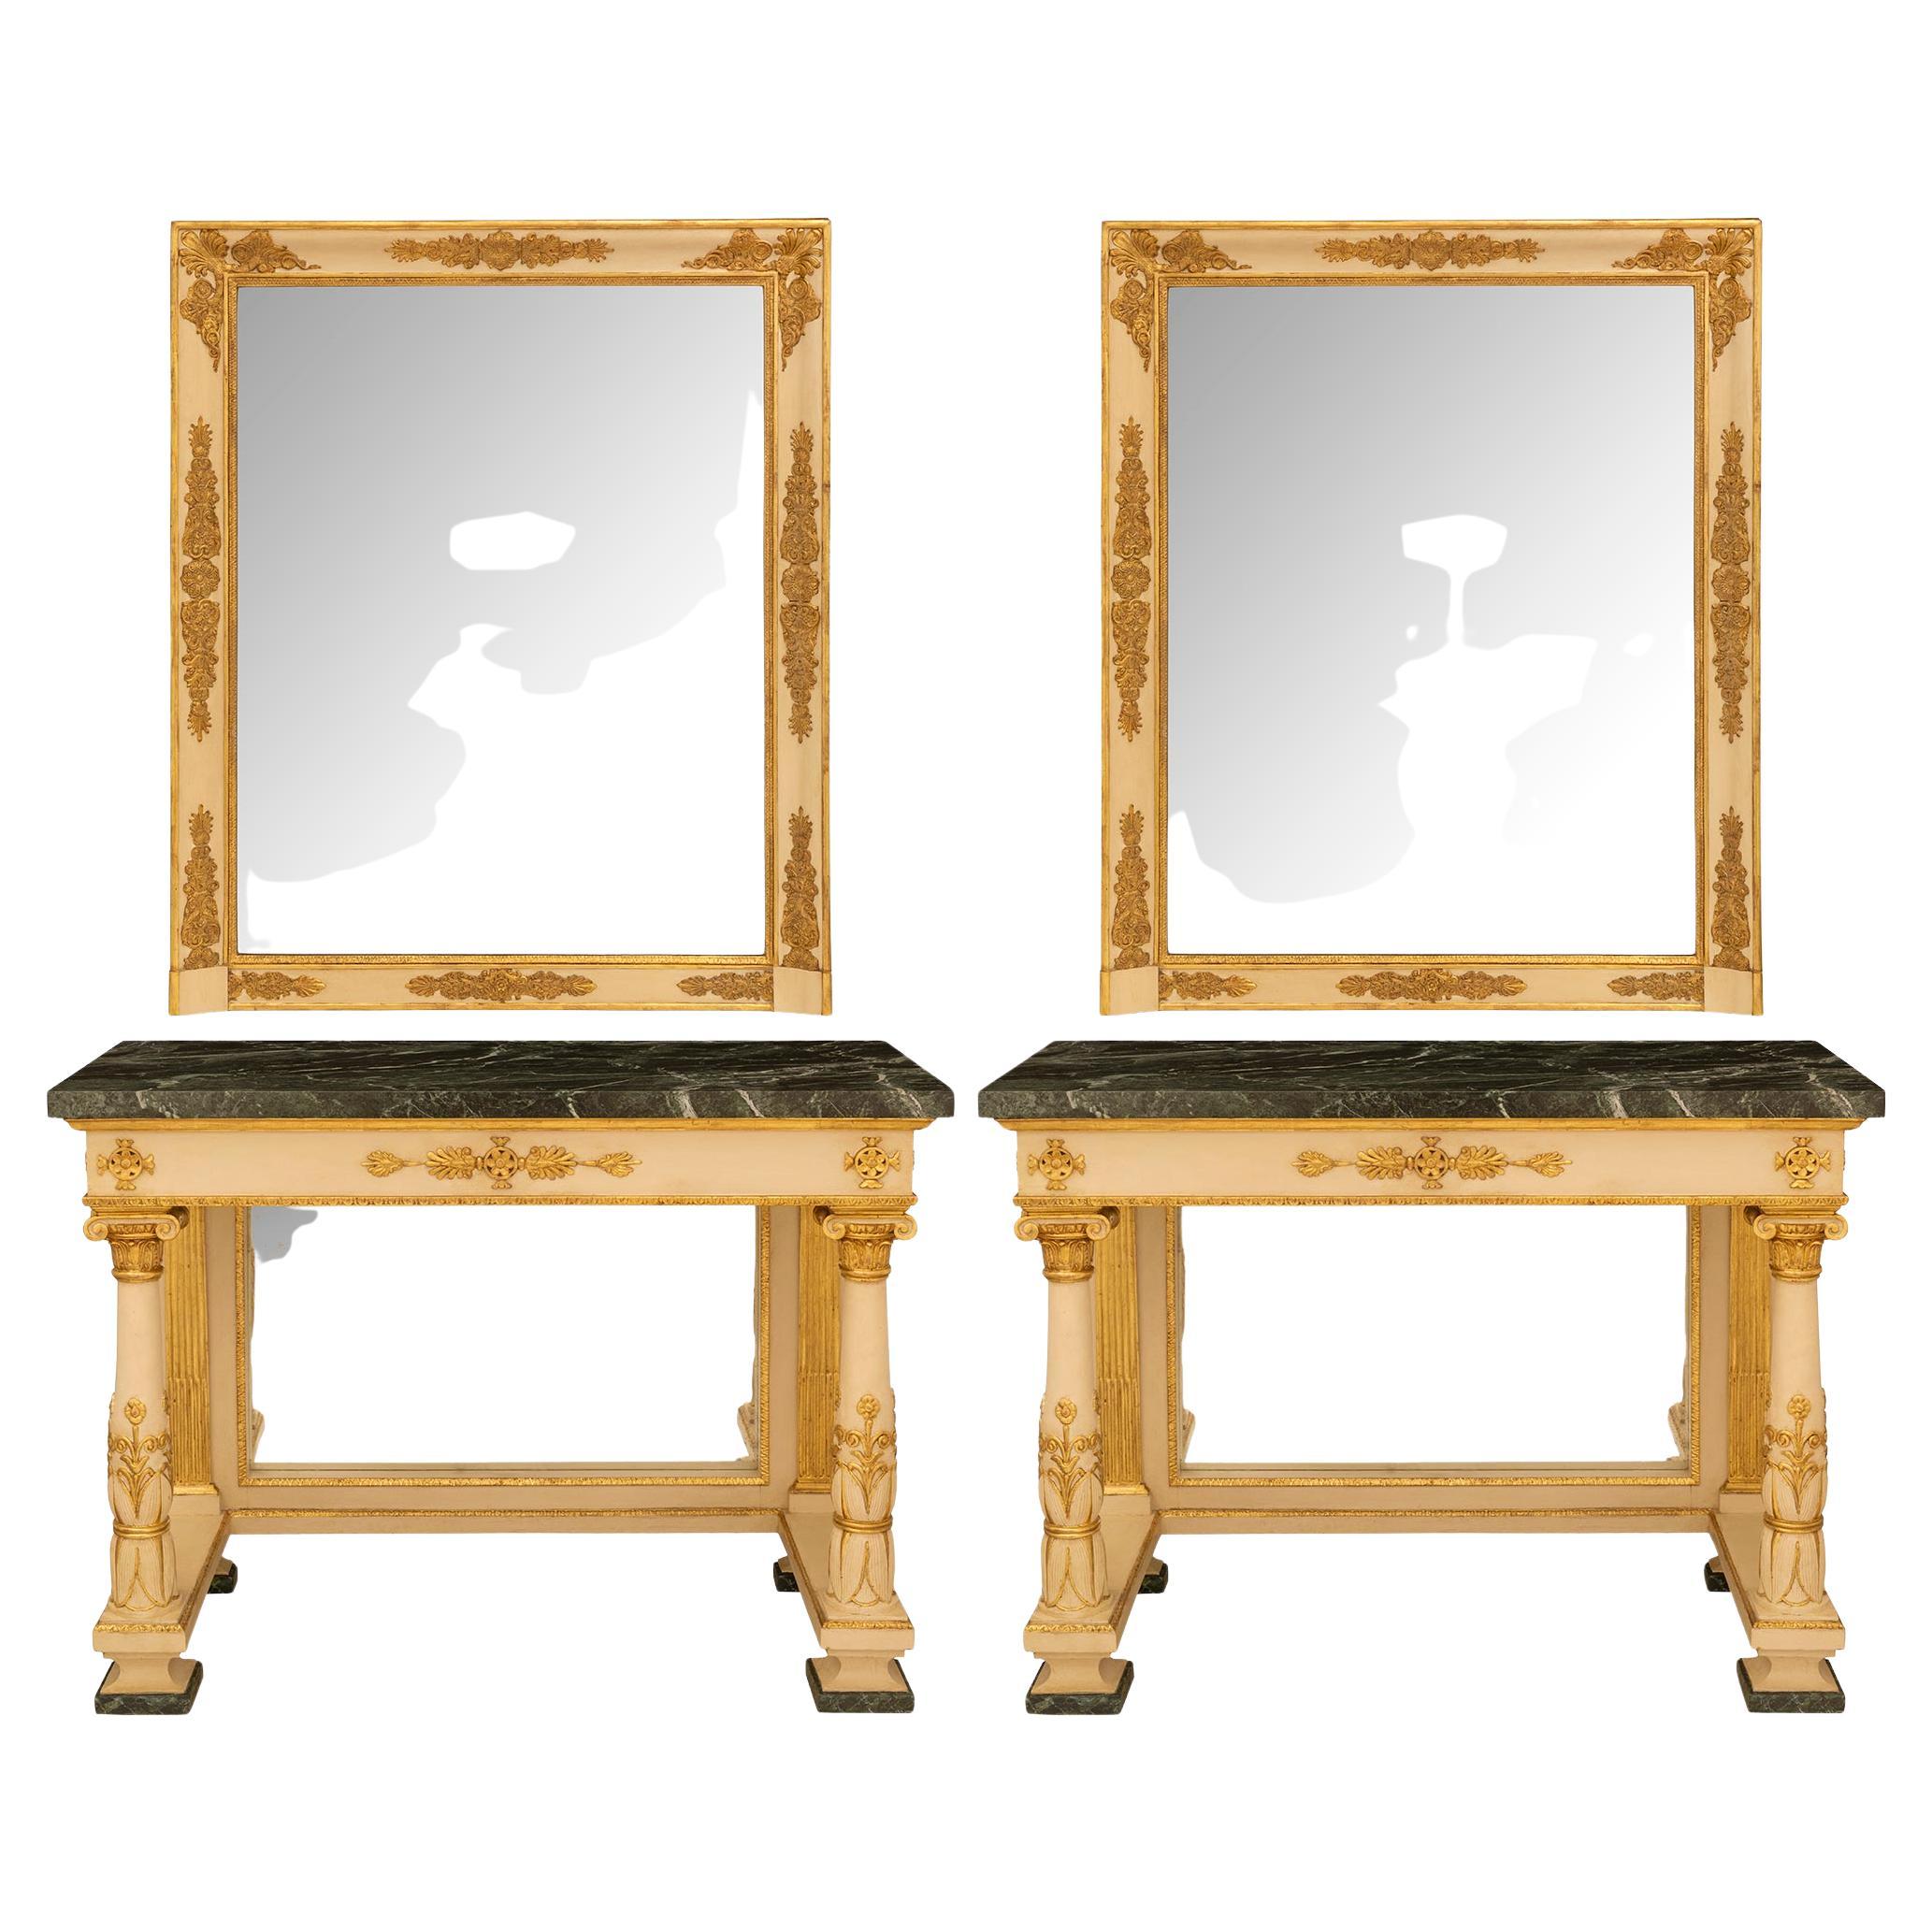 A pair of Italian 19th century Neo-classical st. matching consoles and mirrors